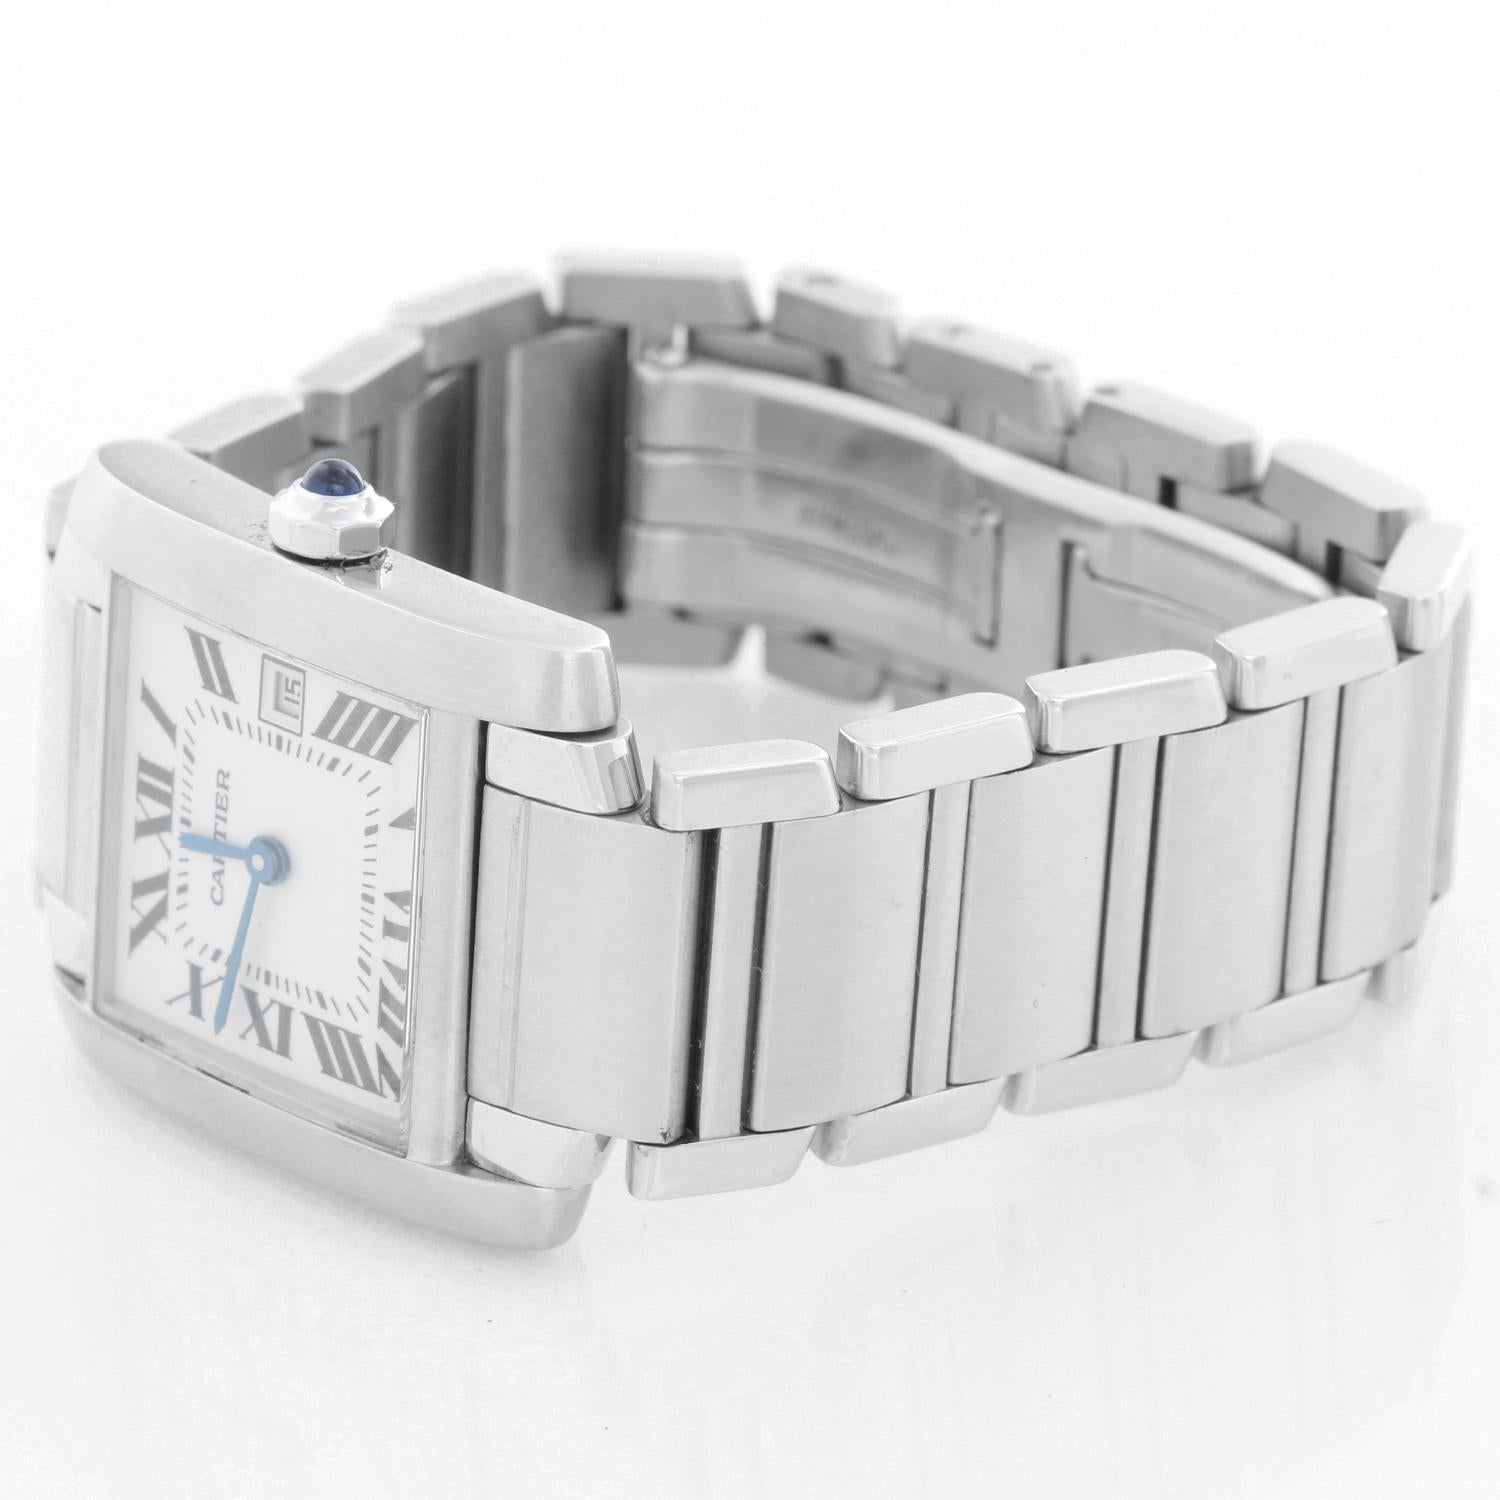 Cartier stainless steel Tank Francaise midsize wristwatch, Ref. W51011Q3, with quartz movement. Stainless steel case (25mm x 30mm). Ivory-colored dial with black Roman numerals, date at 3 o'clock. Stainless steel Cartier bracelet with deployant